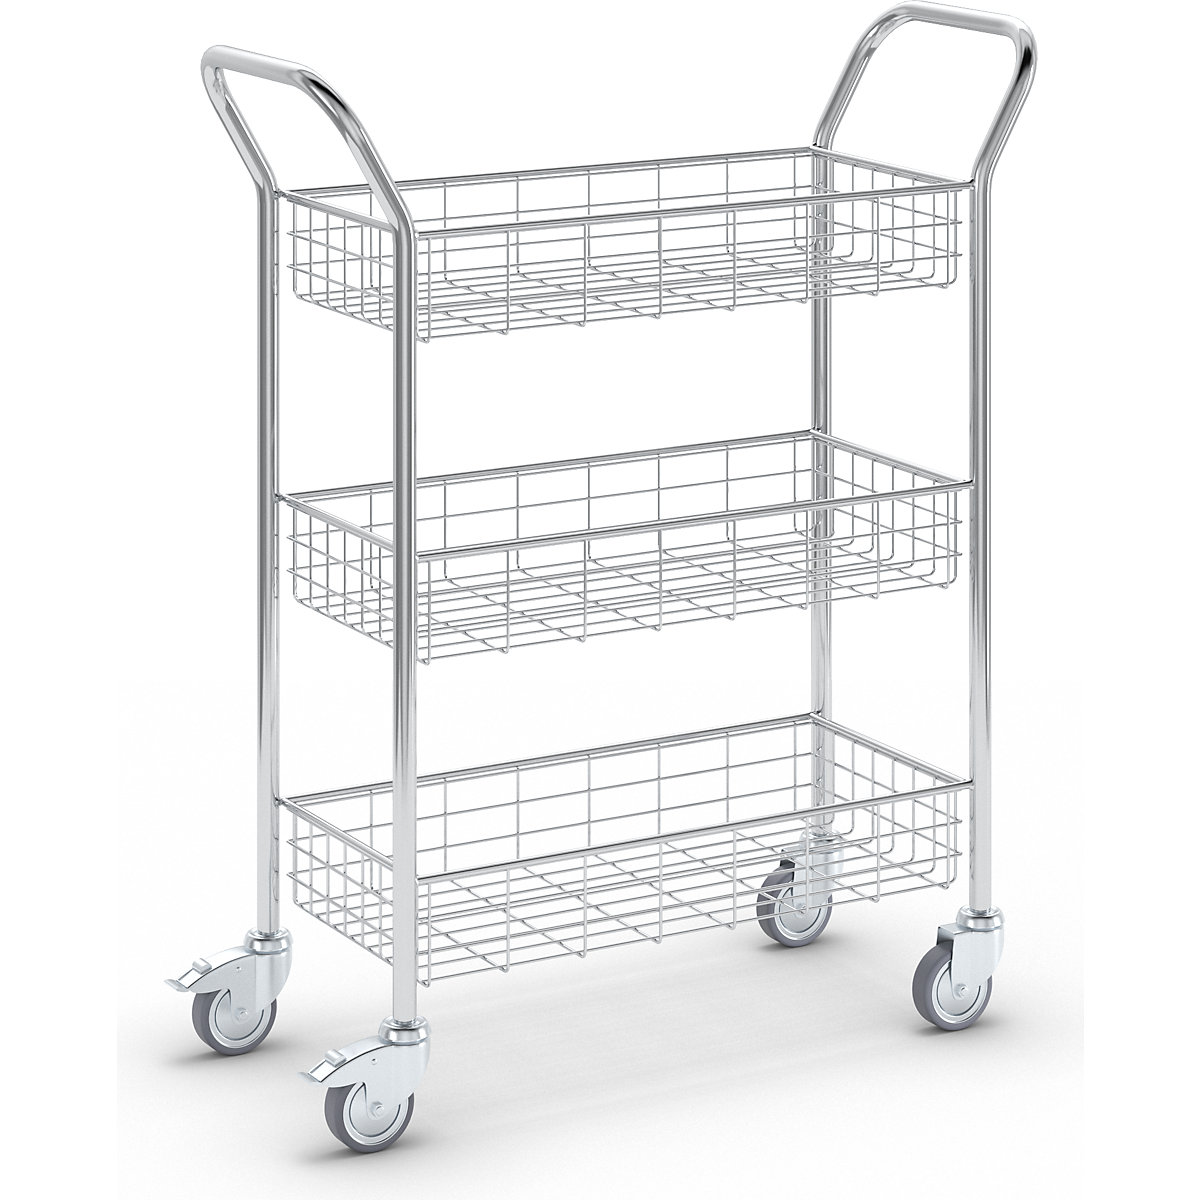 Office and mail distribution trolley - eurokraft pro